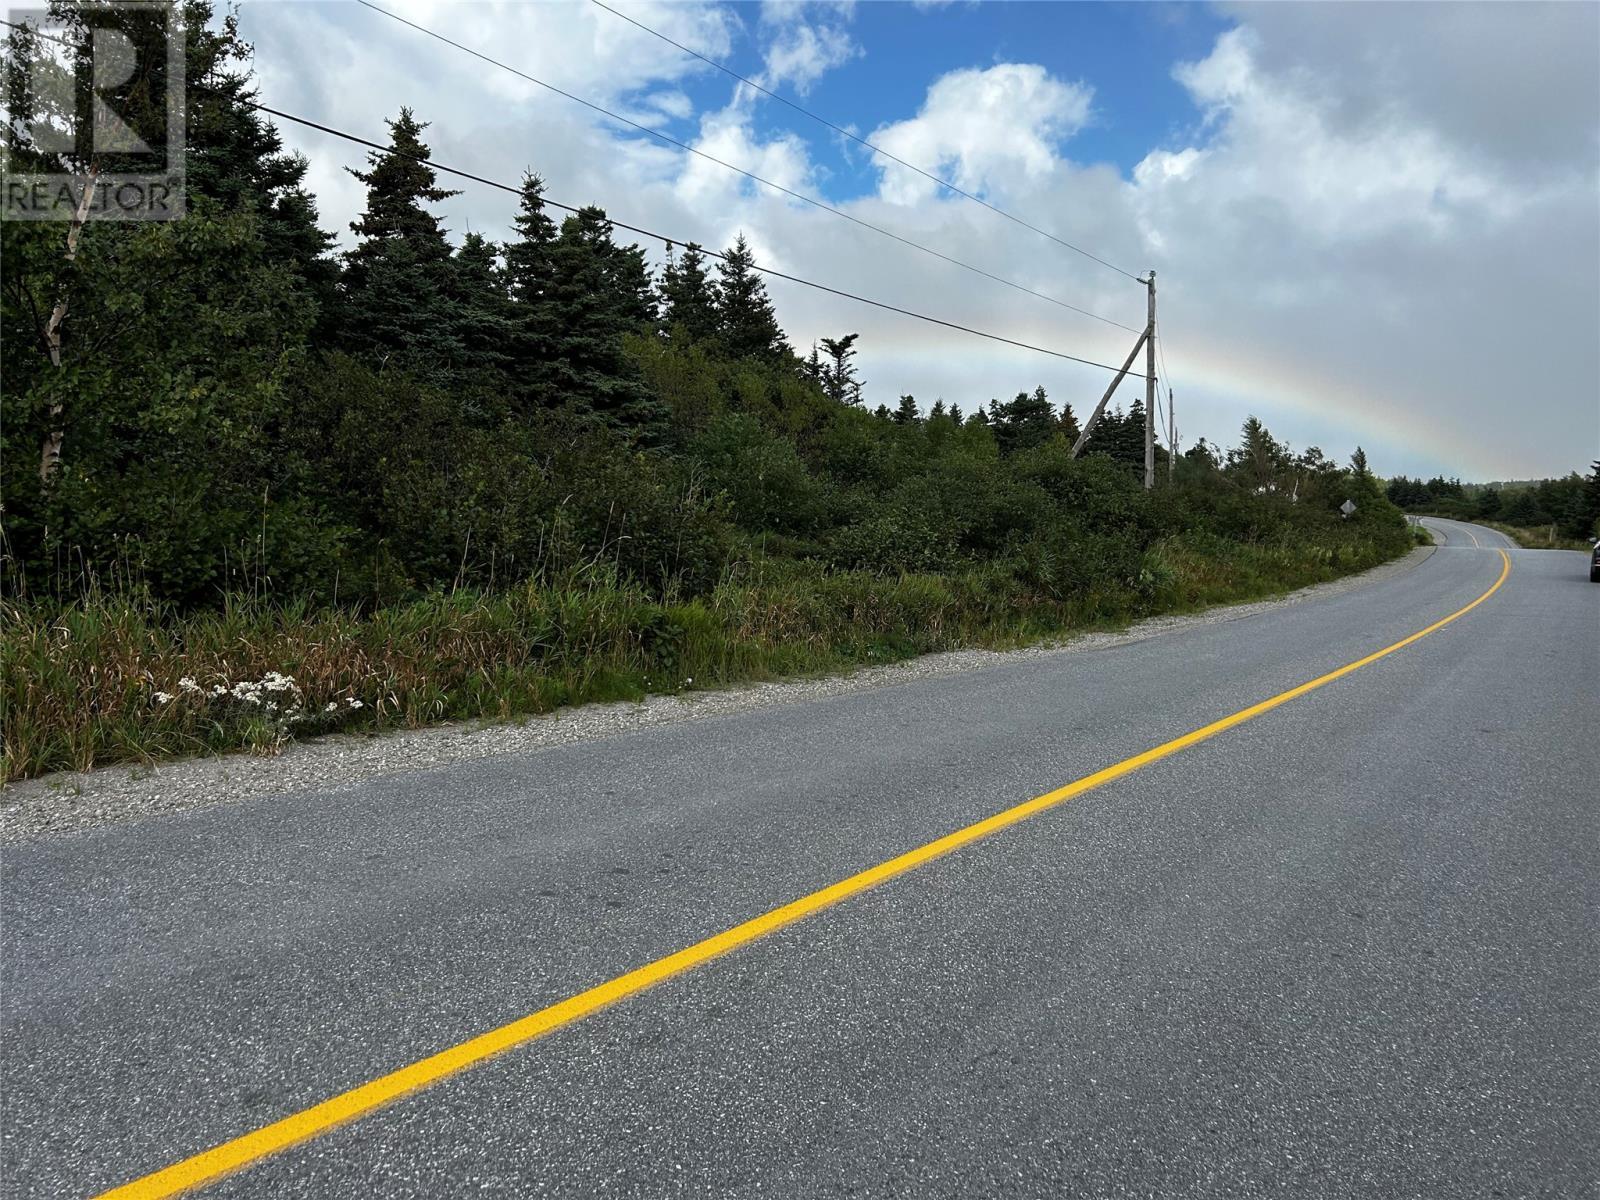 












Route 407 Main Route

,
St Andrews,







Newfoundland & Labrador
A0N1W0

